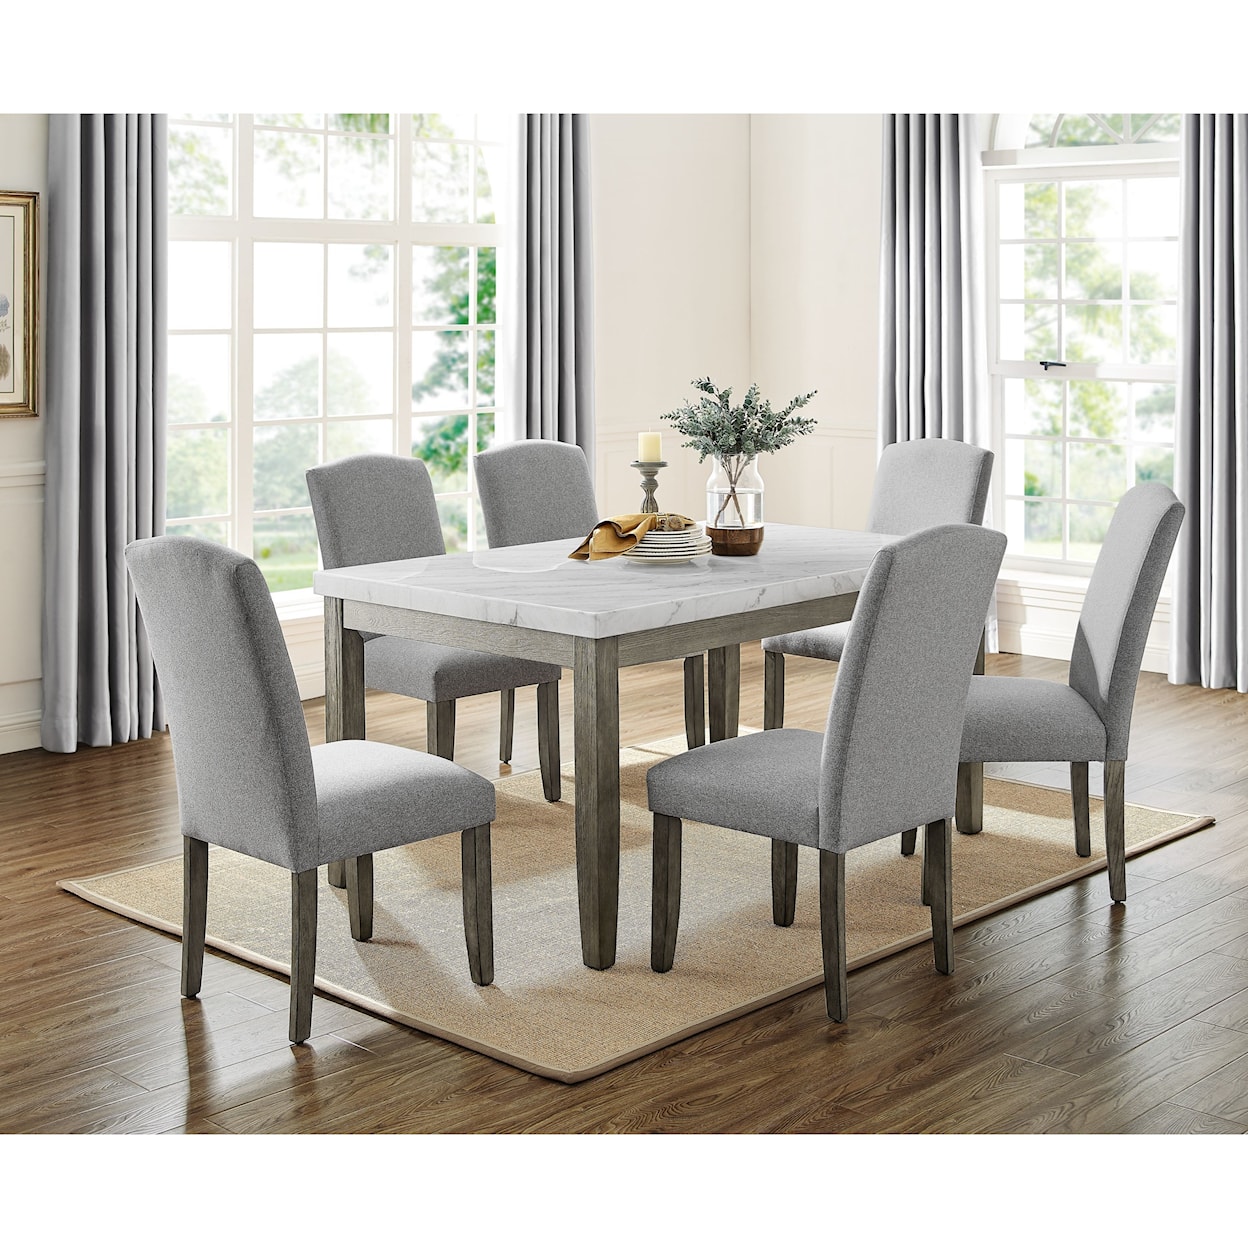 Belfort Essentials Emily 7-Piece Table and Chair Set